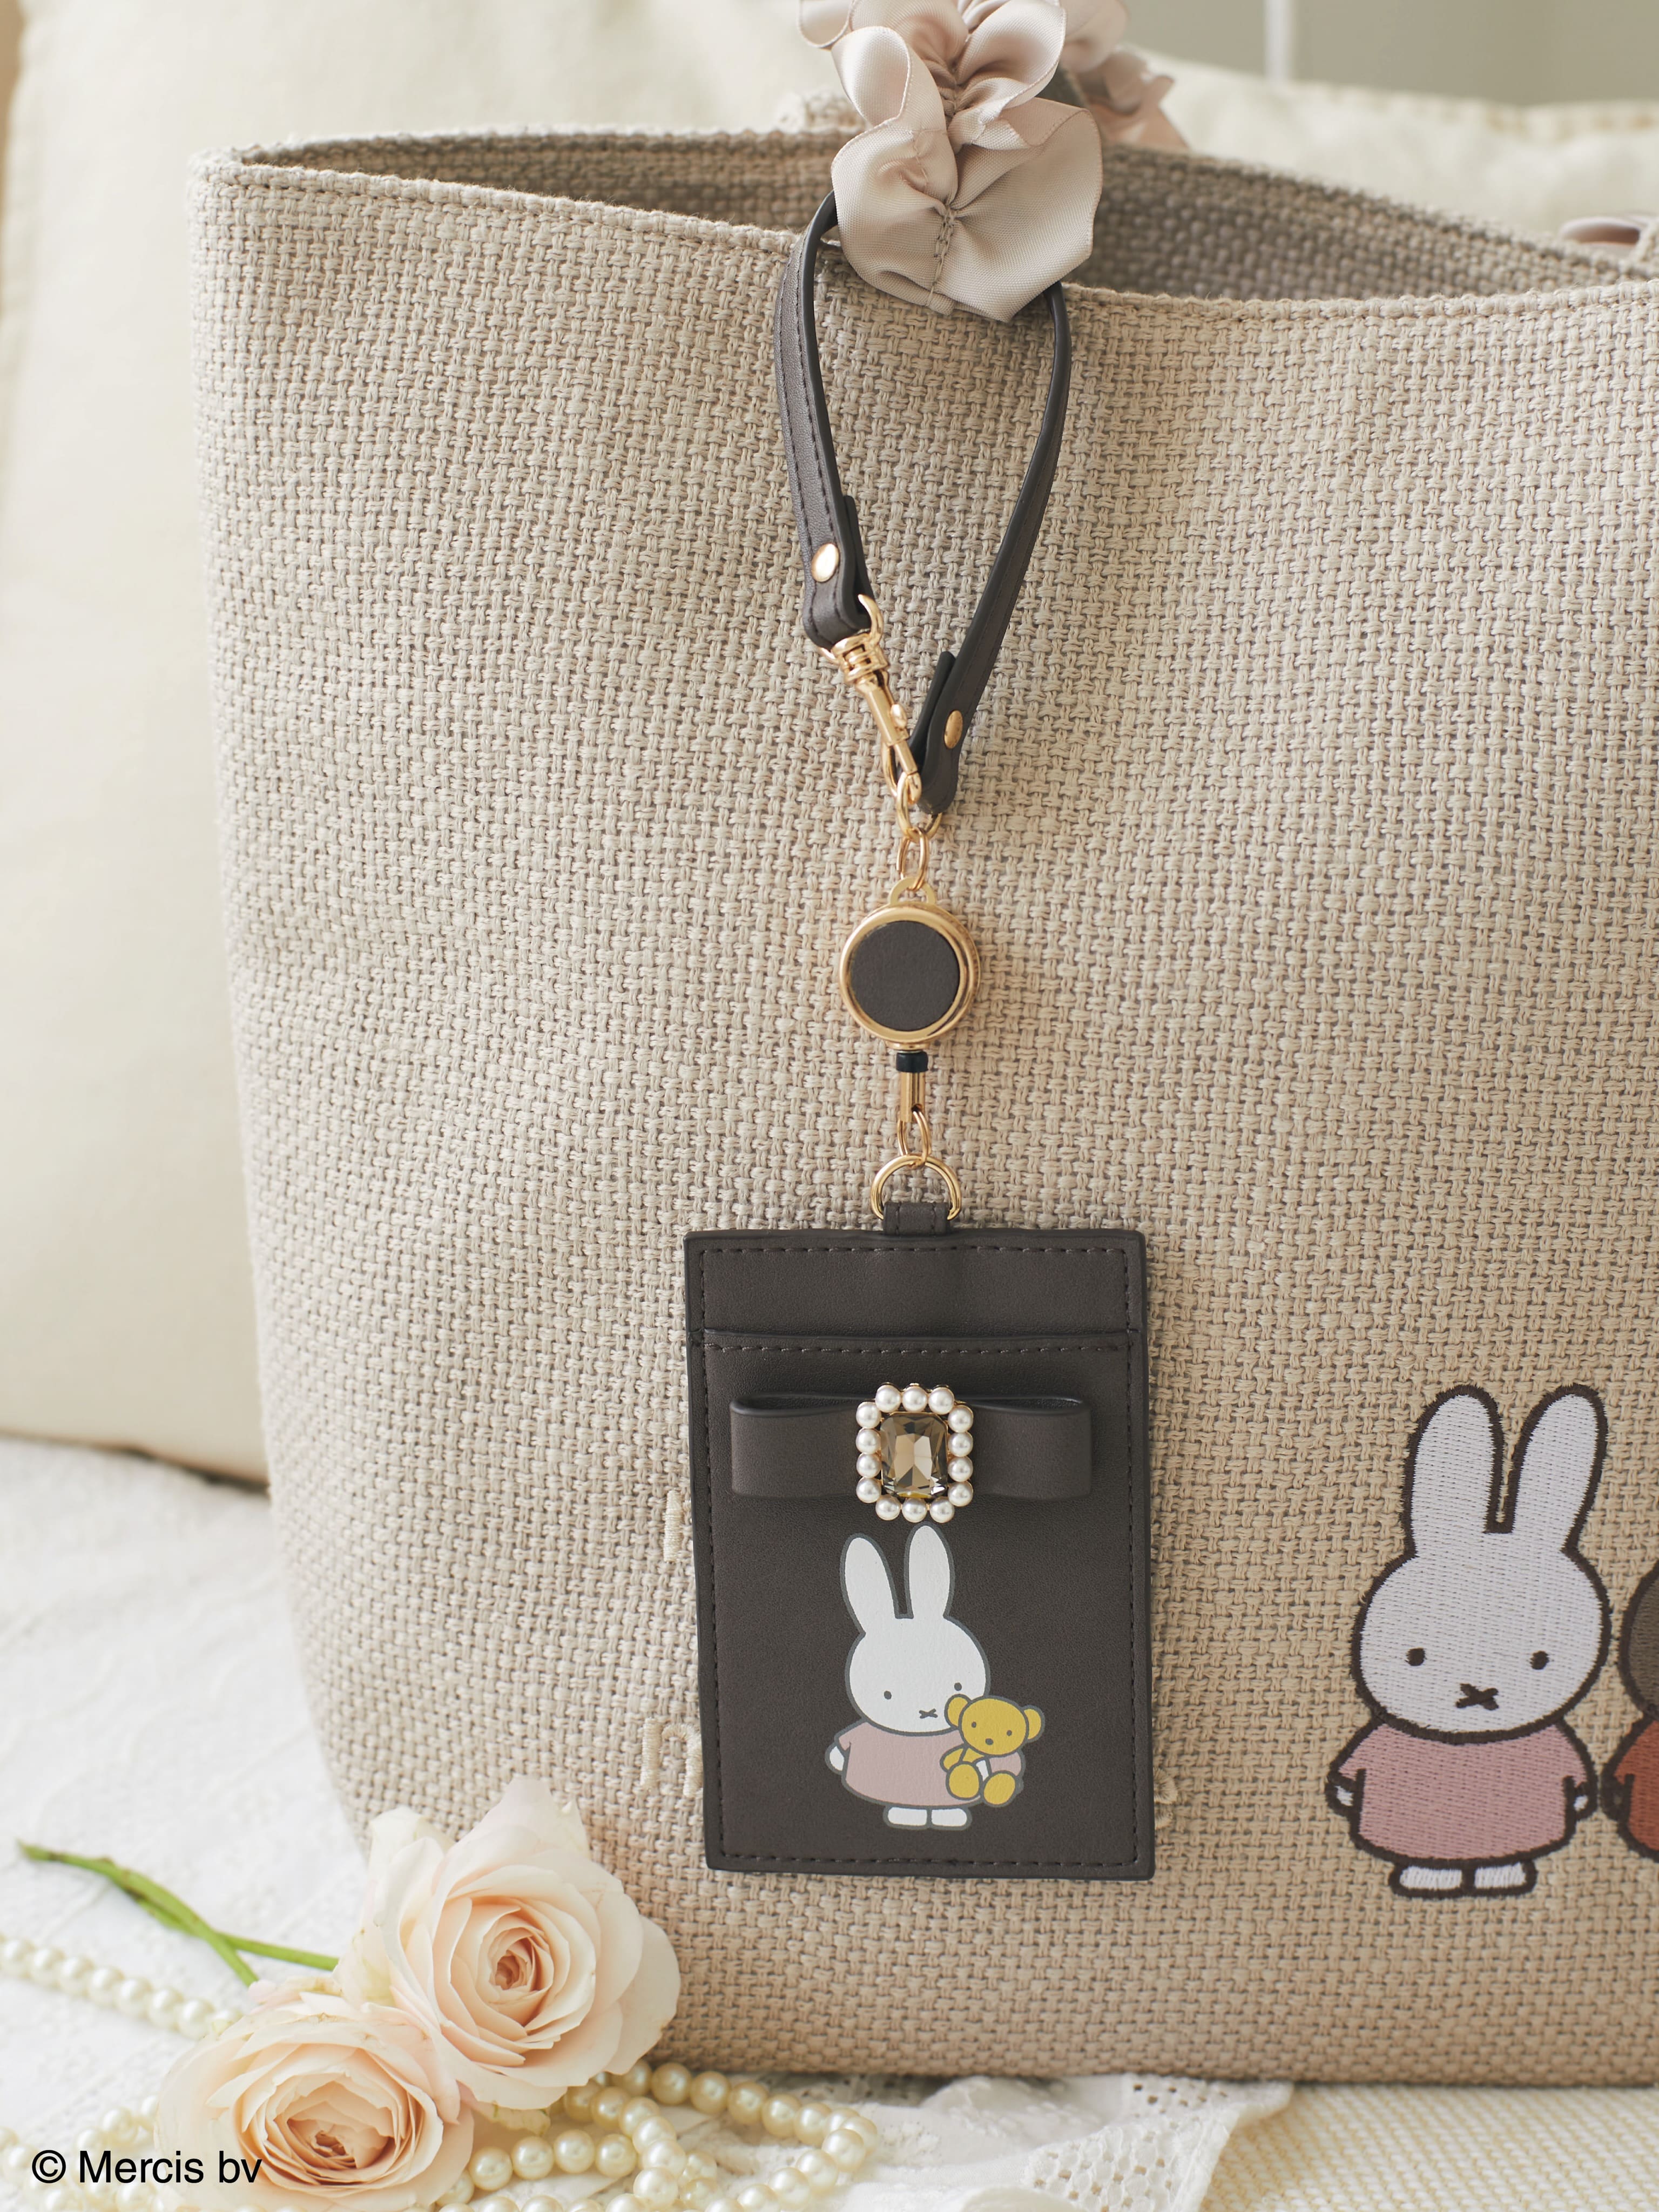 miffy/ﾘｰﾙ付きﾊﾟｽｹｰｽ(F Charcoal Gray)｜ メゾン ド フルール｜仙台PARCO ONLINE  PARCO（オンラインパルコ）